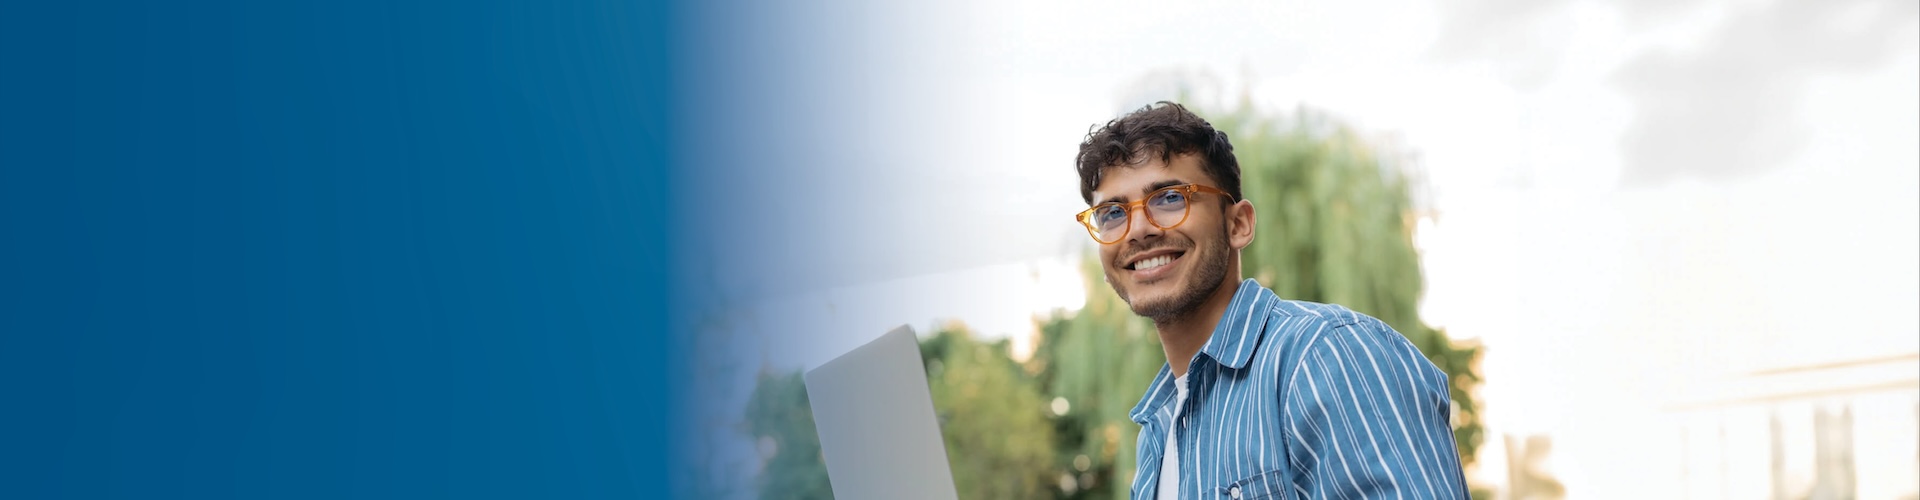 A man in glasses smiling while holding a laptop